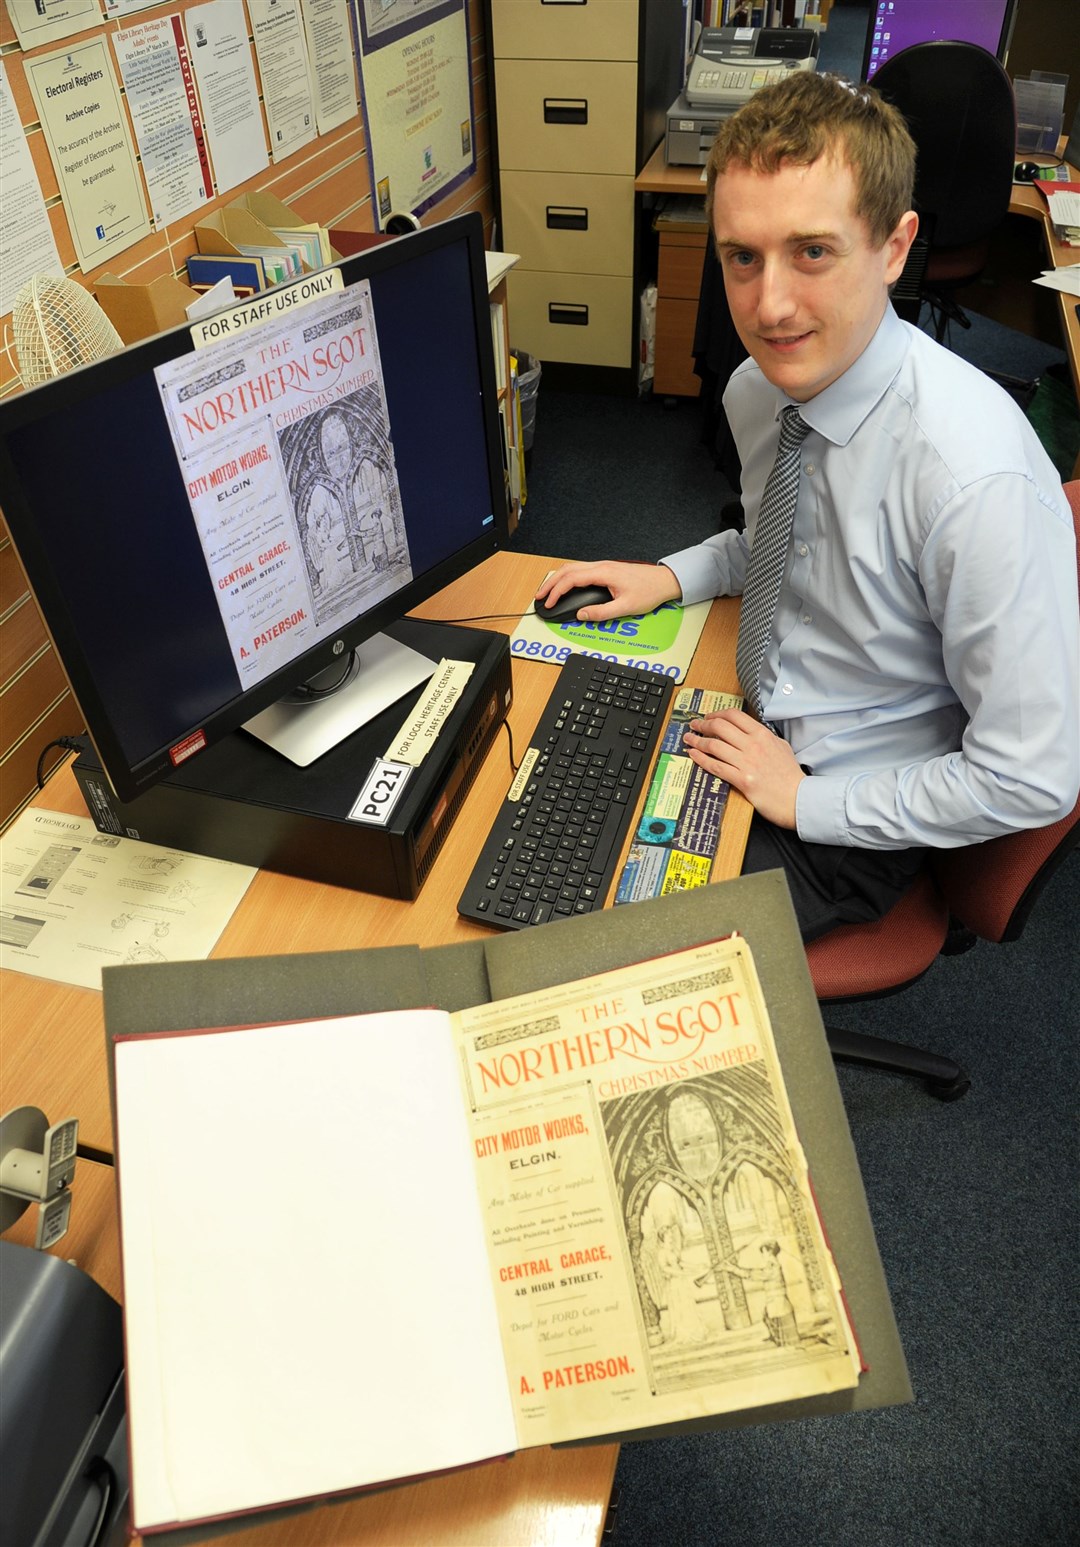 Elgin Library Heritage Officer Scott Reid digitising old Christmas Numbers from Wold War 1.Picture: Eric Cormack. Image No. (043463).